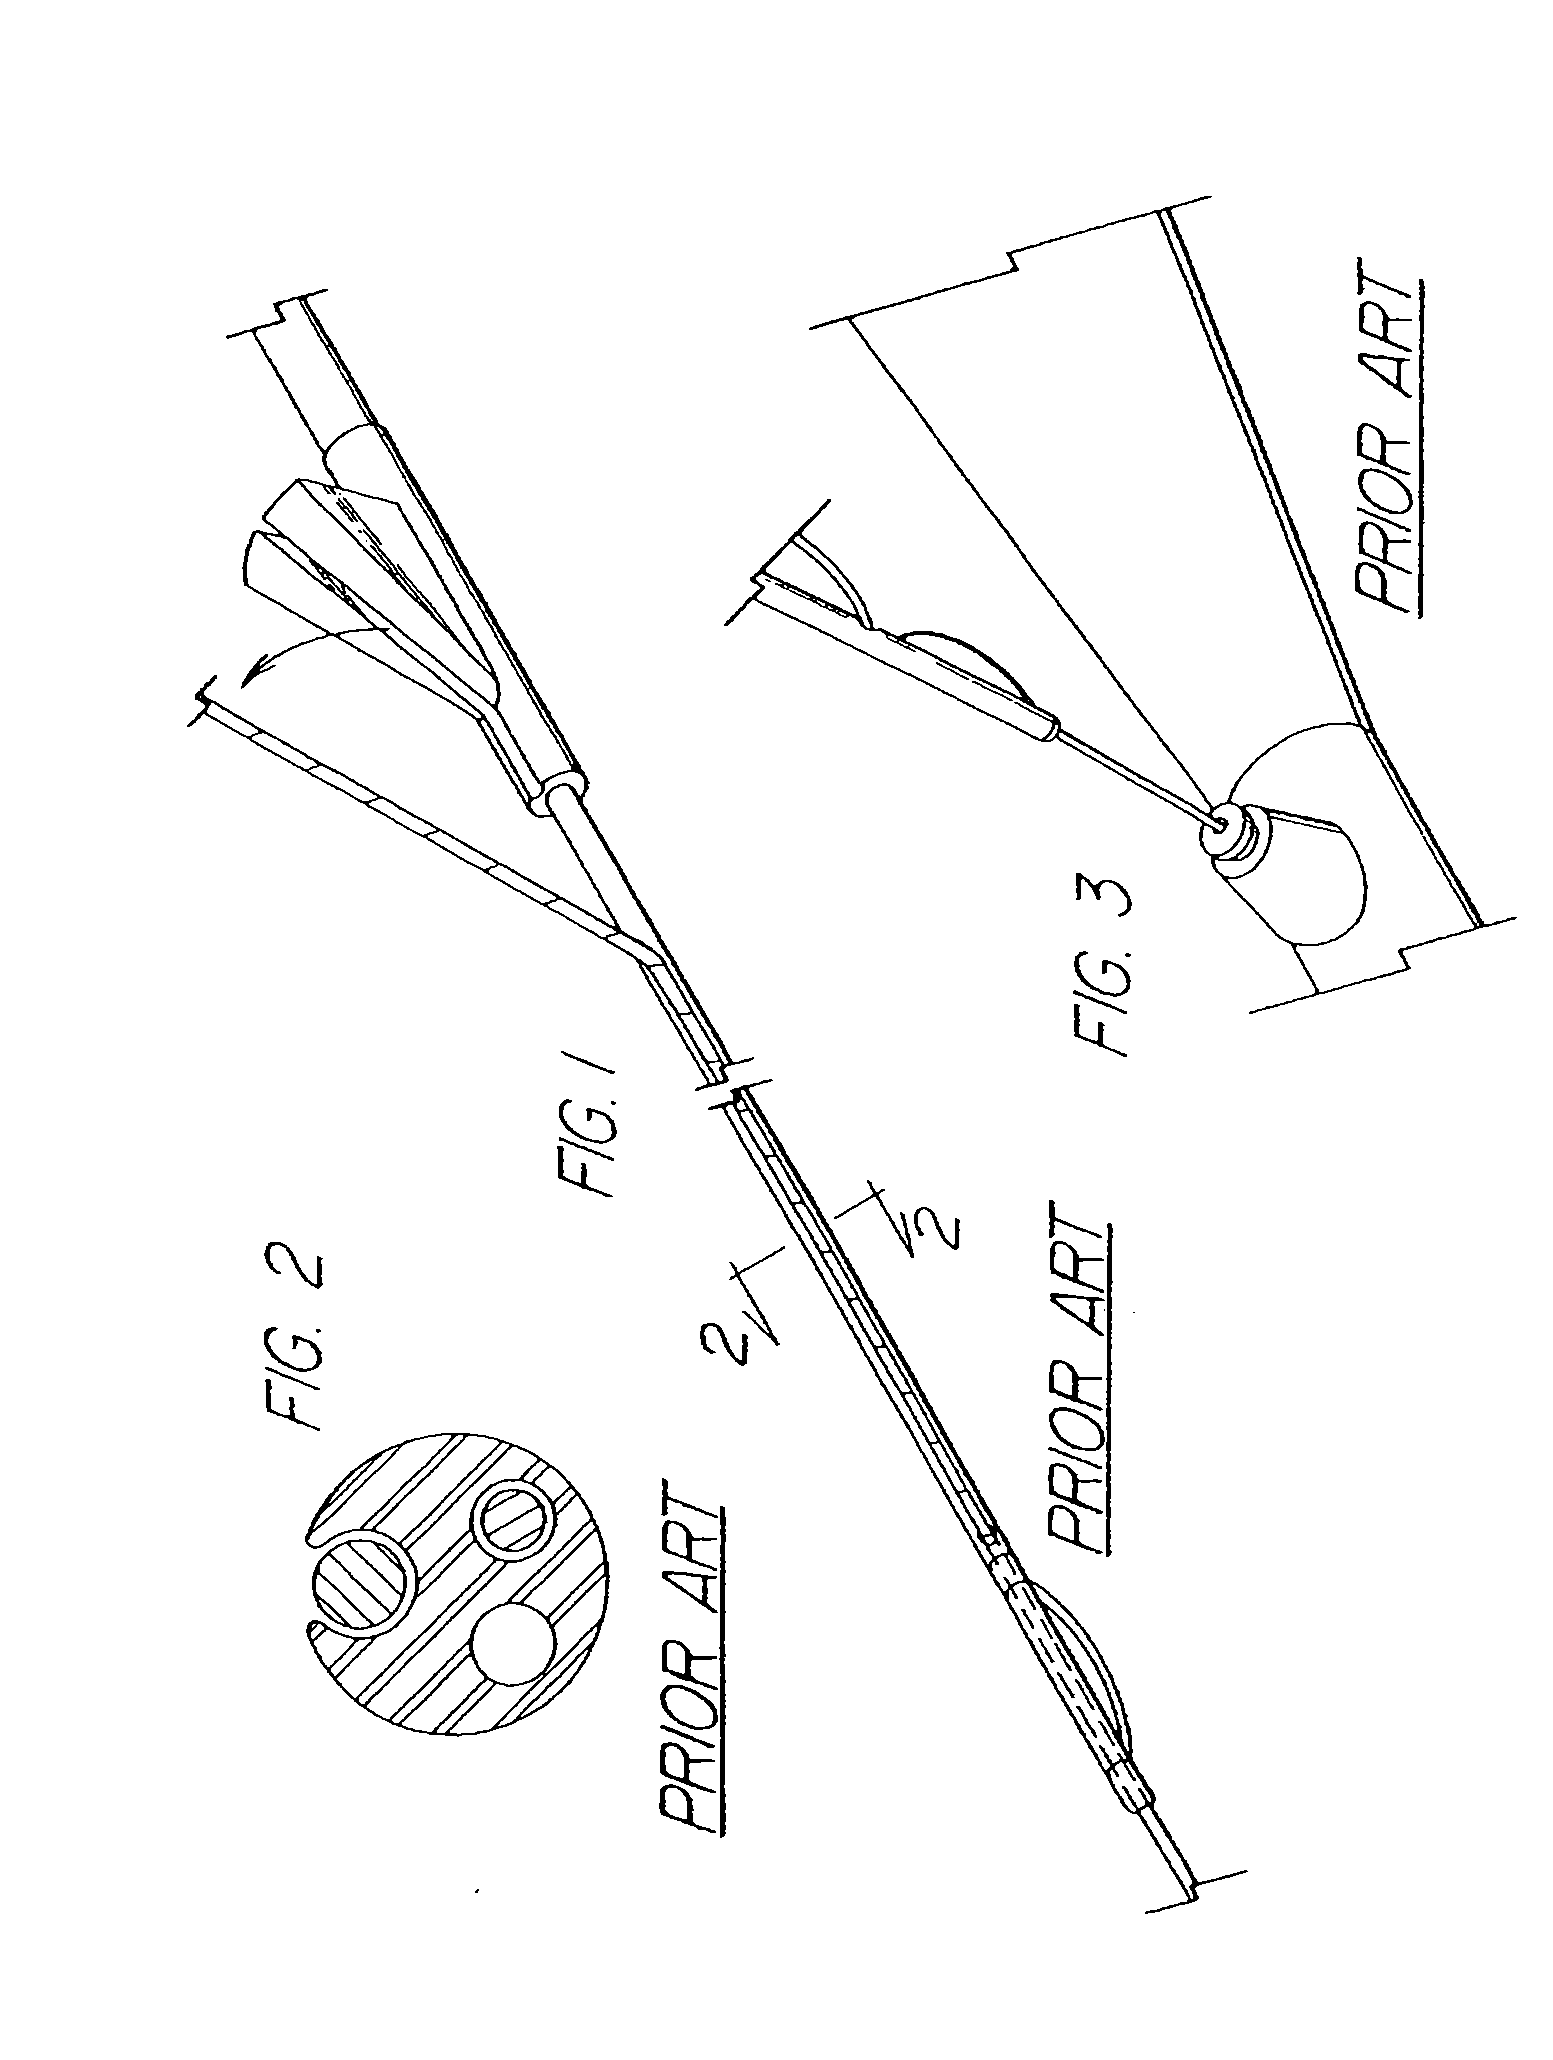 System and method for introducing multiple medical devices